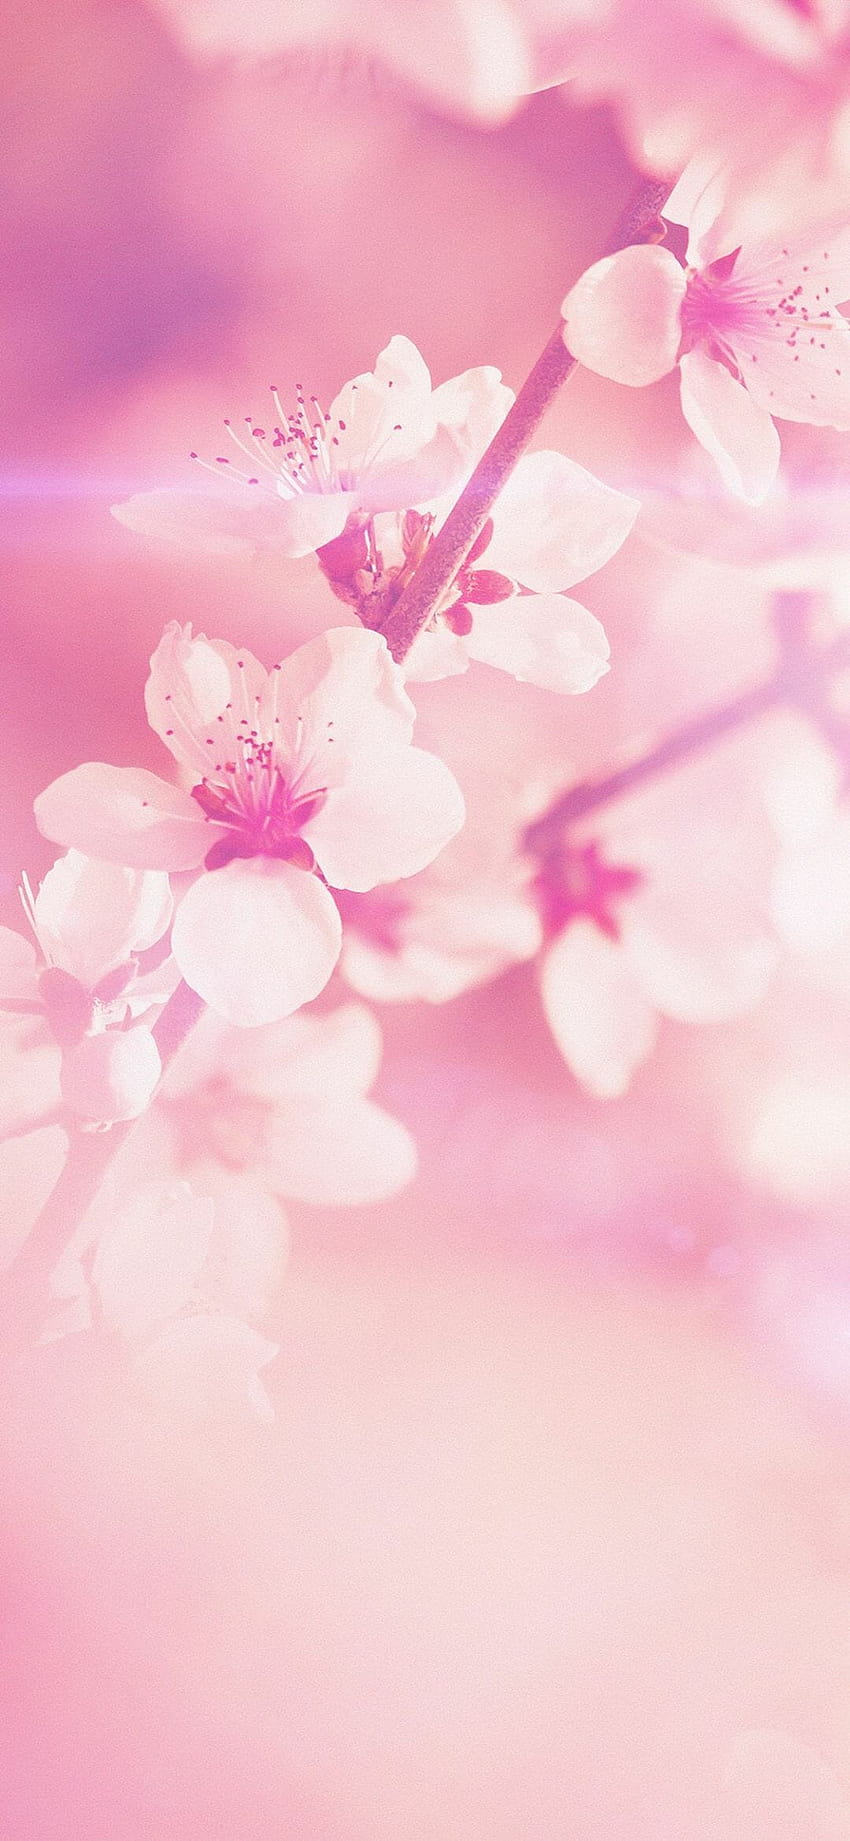 1 Spring Flower Pink Cherry Blossom Flare Nature IPhone X, flower spring pink HD phone wallpaper